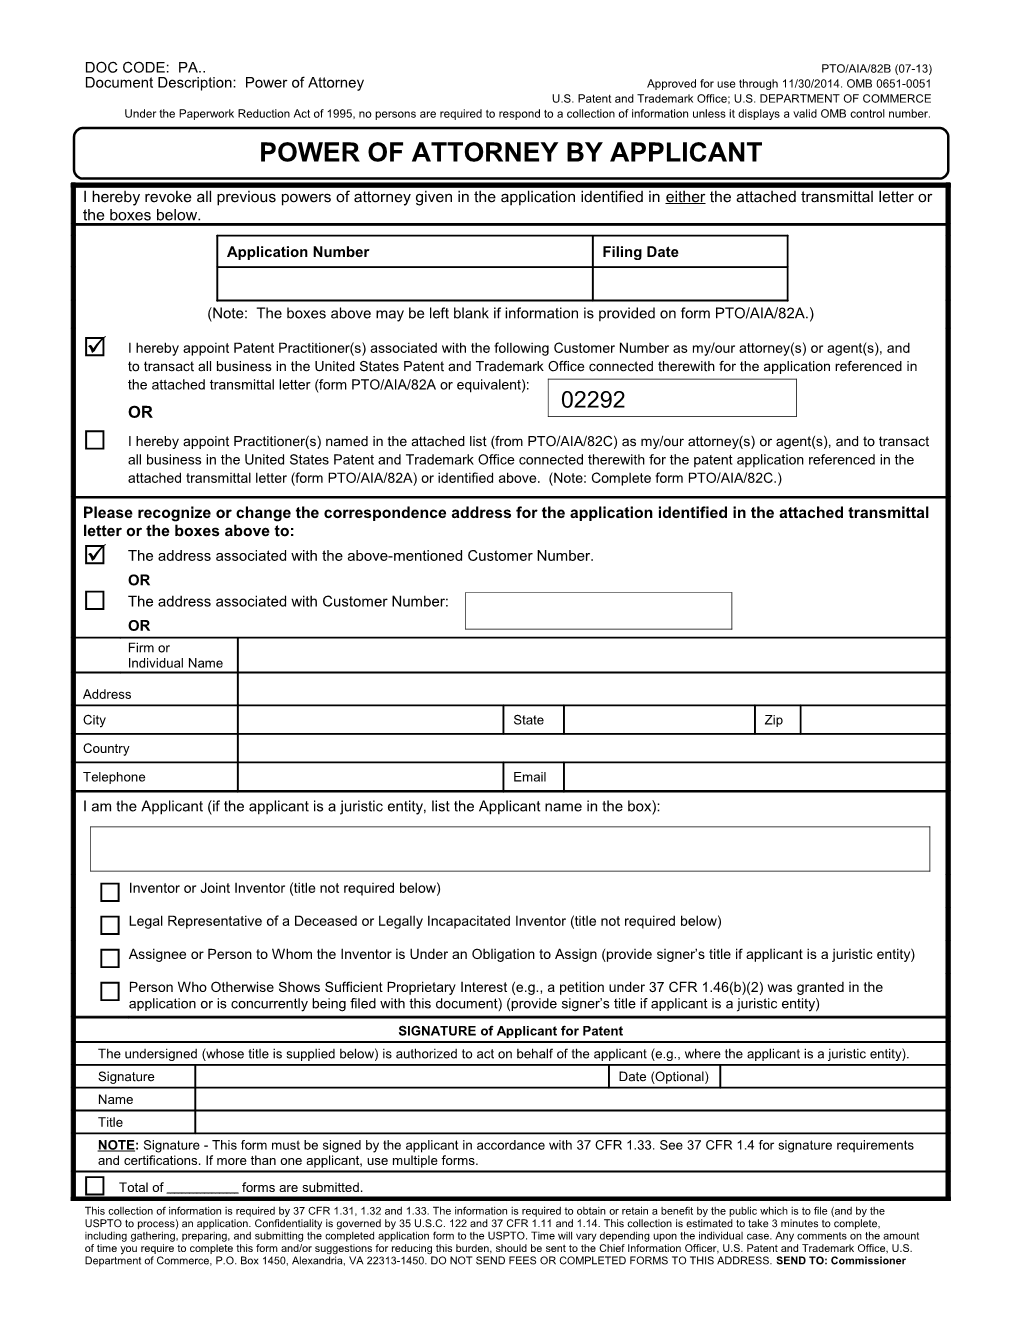 If You Need Assistance in Completing the Form, Call 1-800-PTO-9199 and Select Option 2